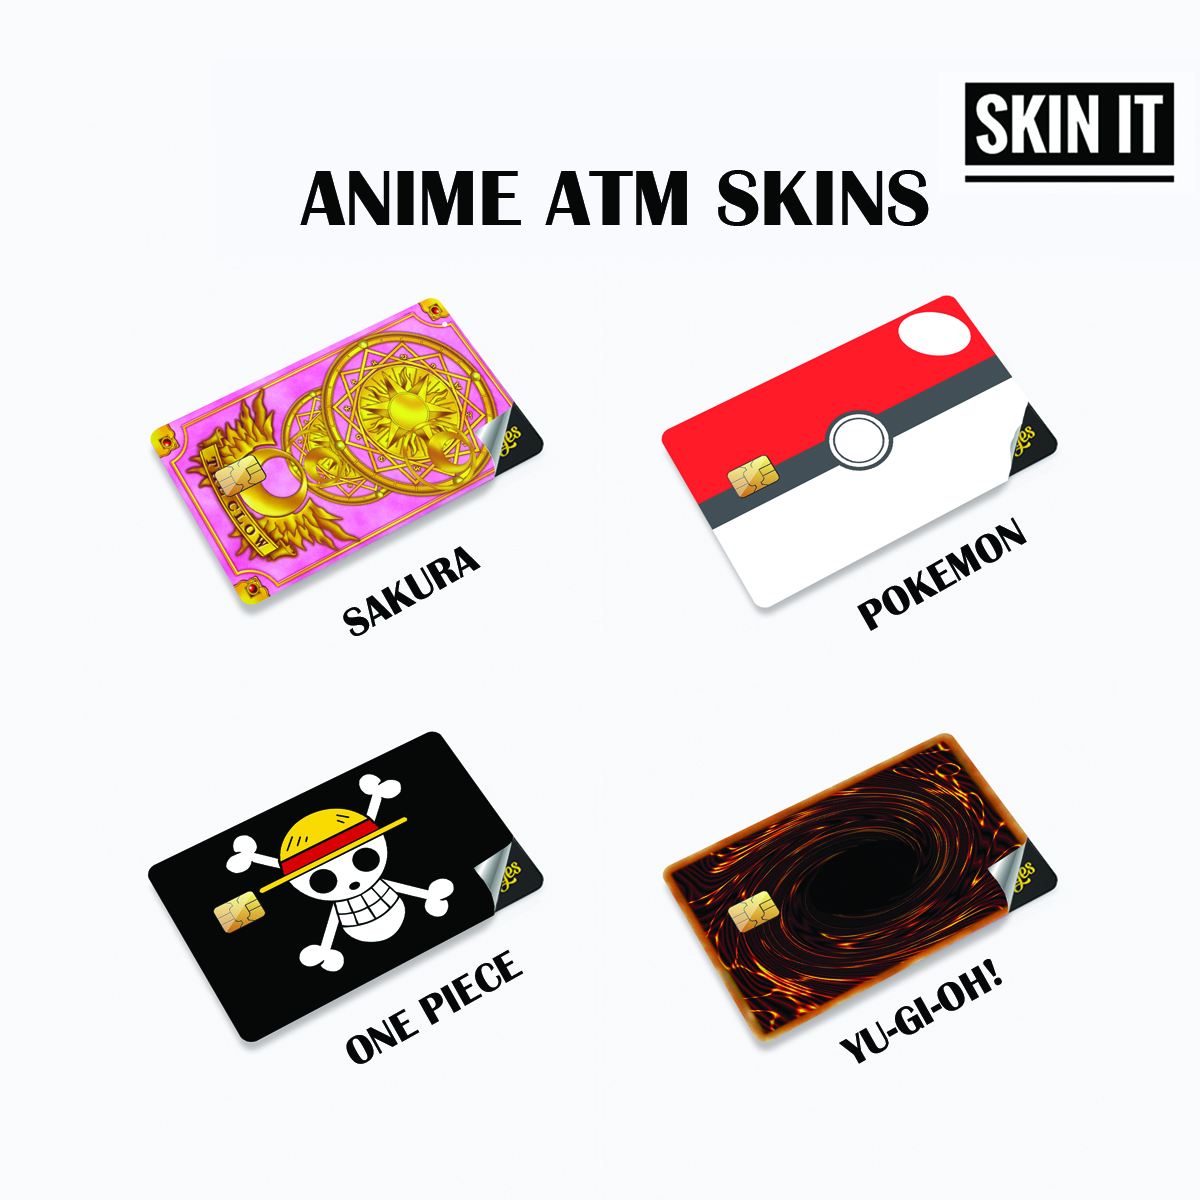 XUTHIWG 4pcs Anime Card Skin Fashion Credit Card Stickers and Debit Card  Sticker Cartoon Vinyl Decal Stickers Skin Cover Protective Faceplate Full  Set Card in Dubai - UAE | Whizz